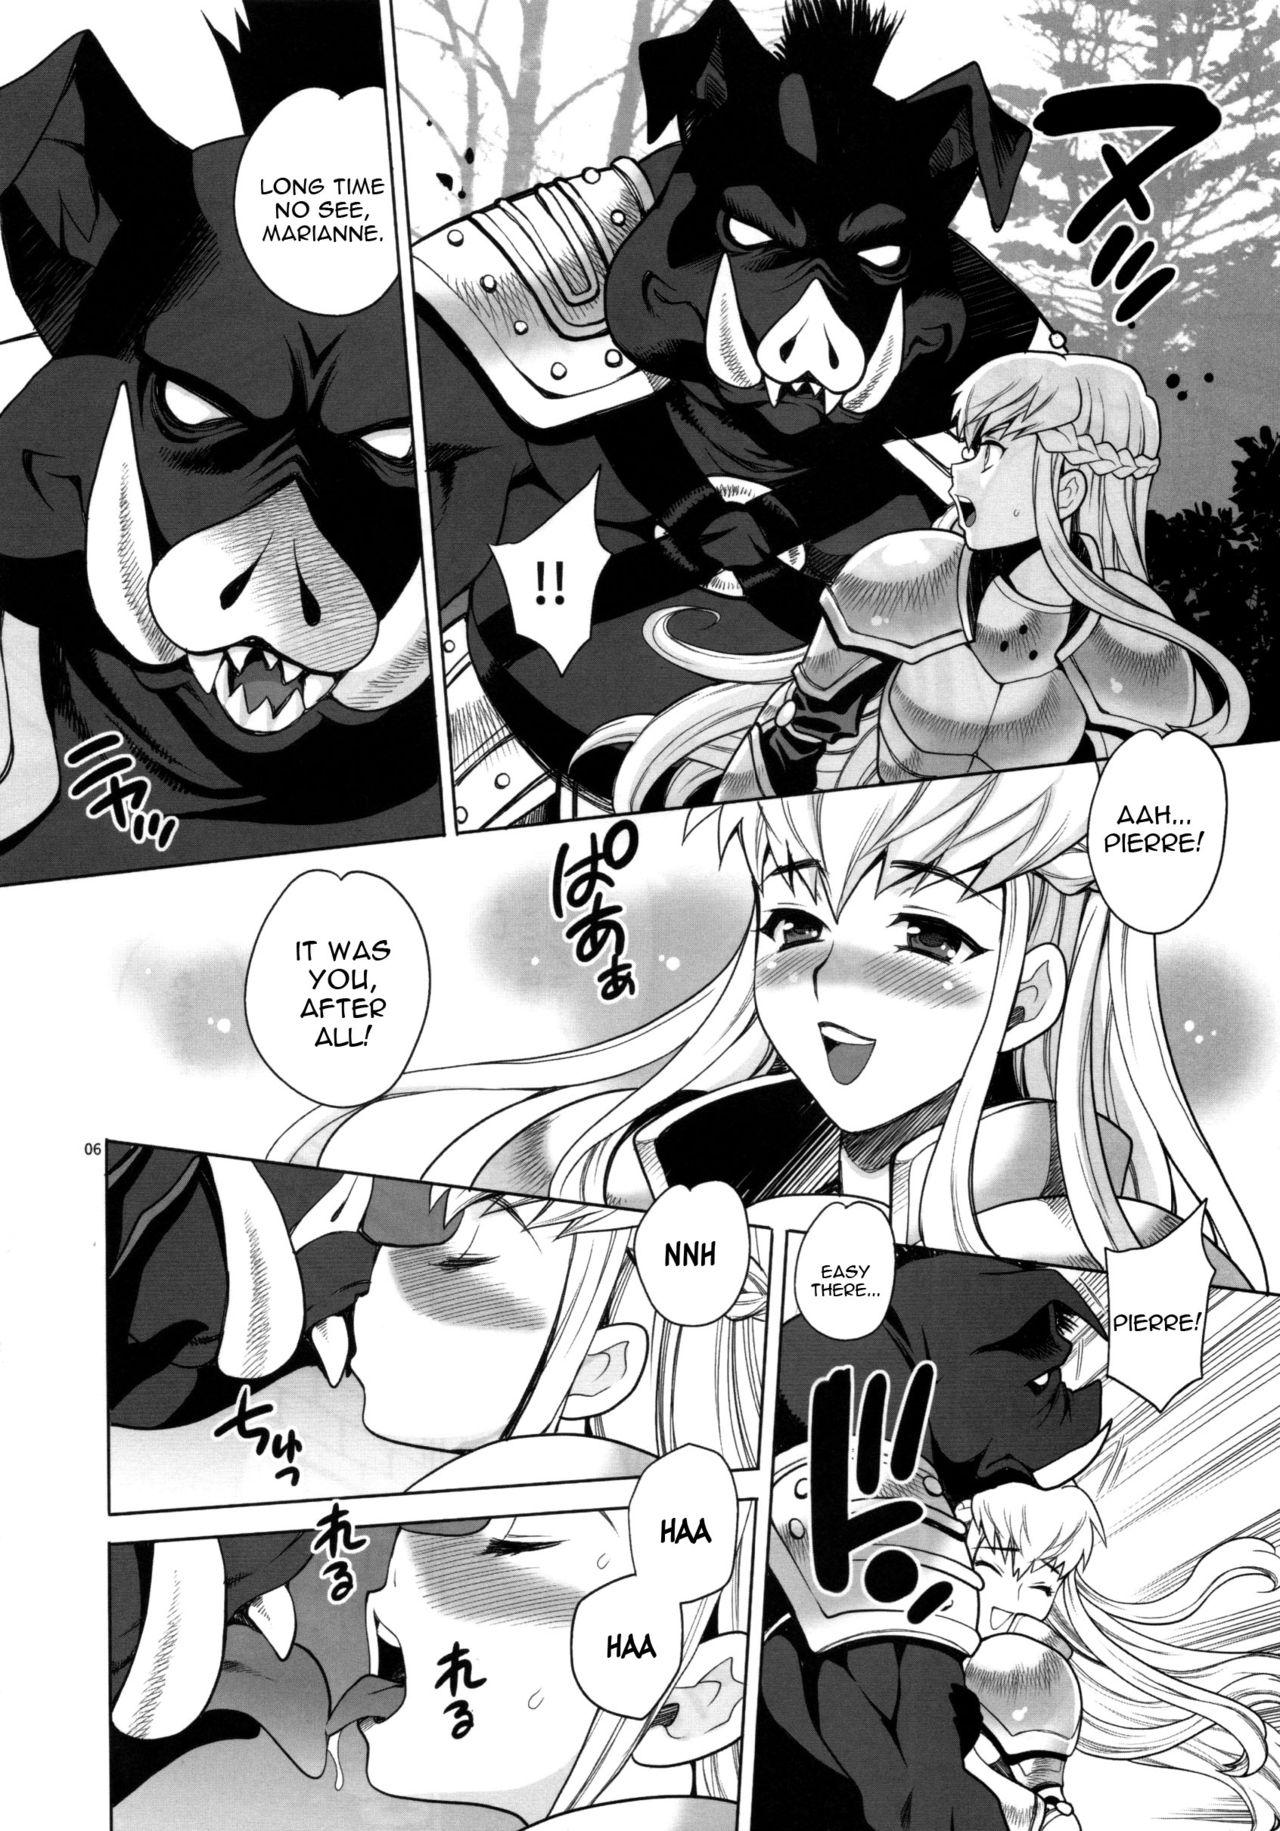 Married Yukiyanagi no Hon 37 Buta to Onnakishi - Lady knight in love with Orc Pawg - Page 5